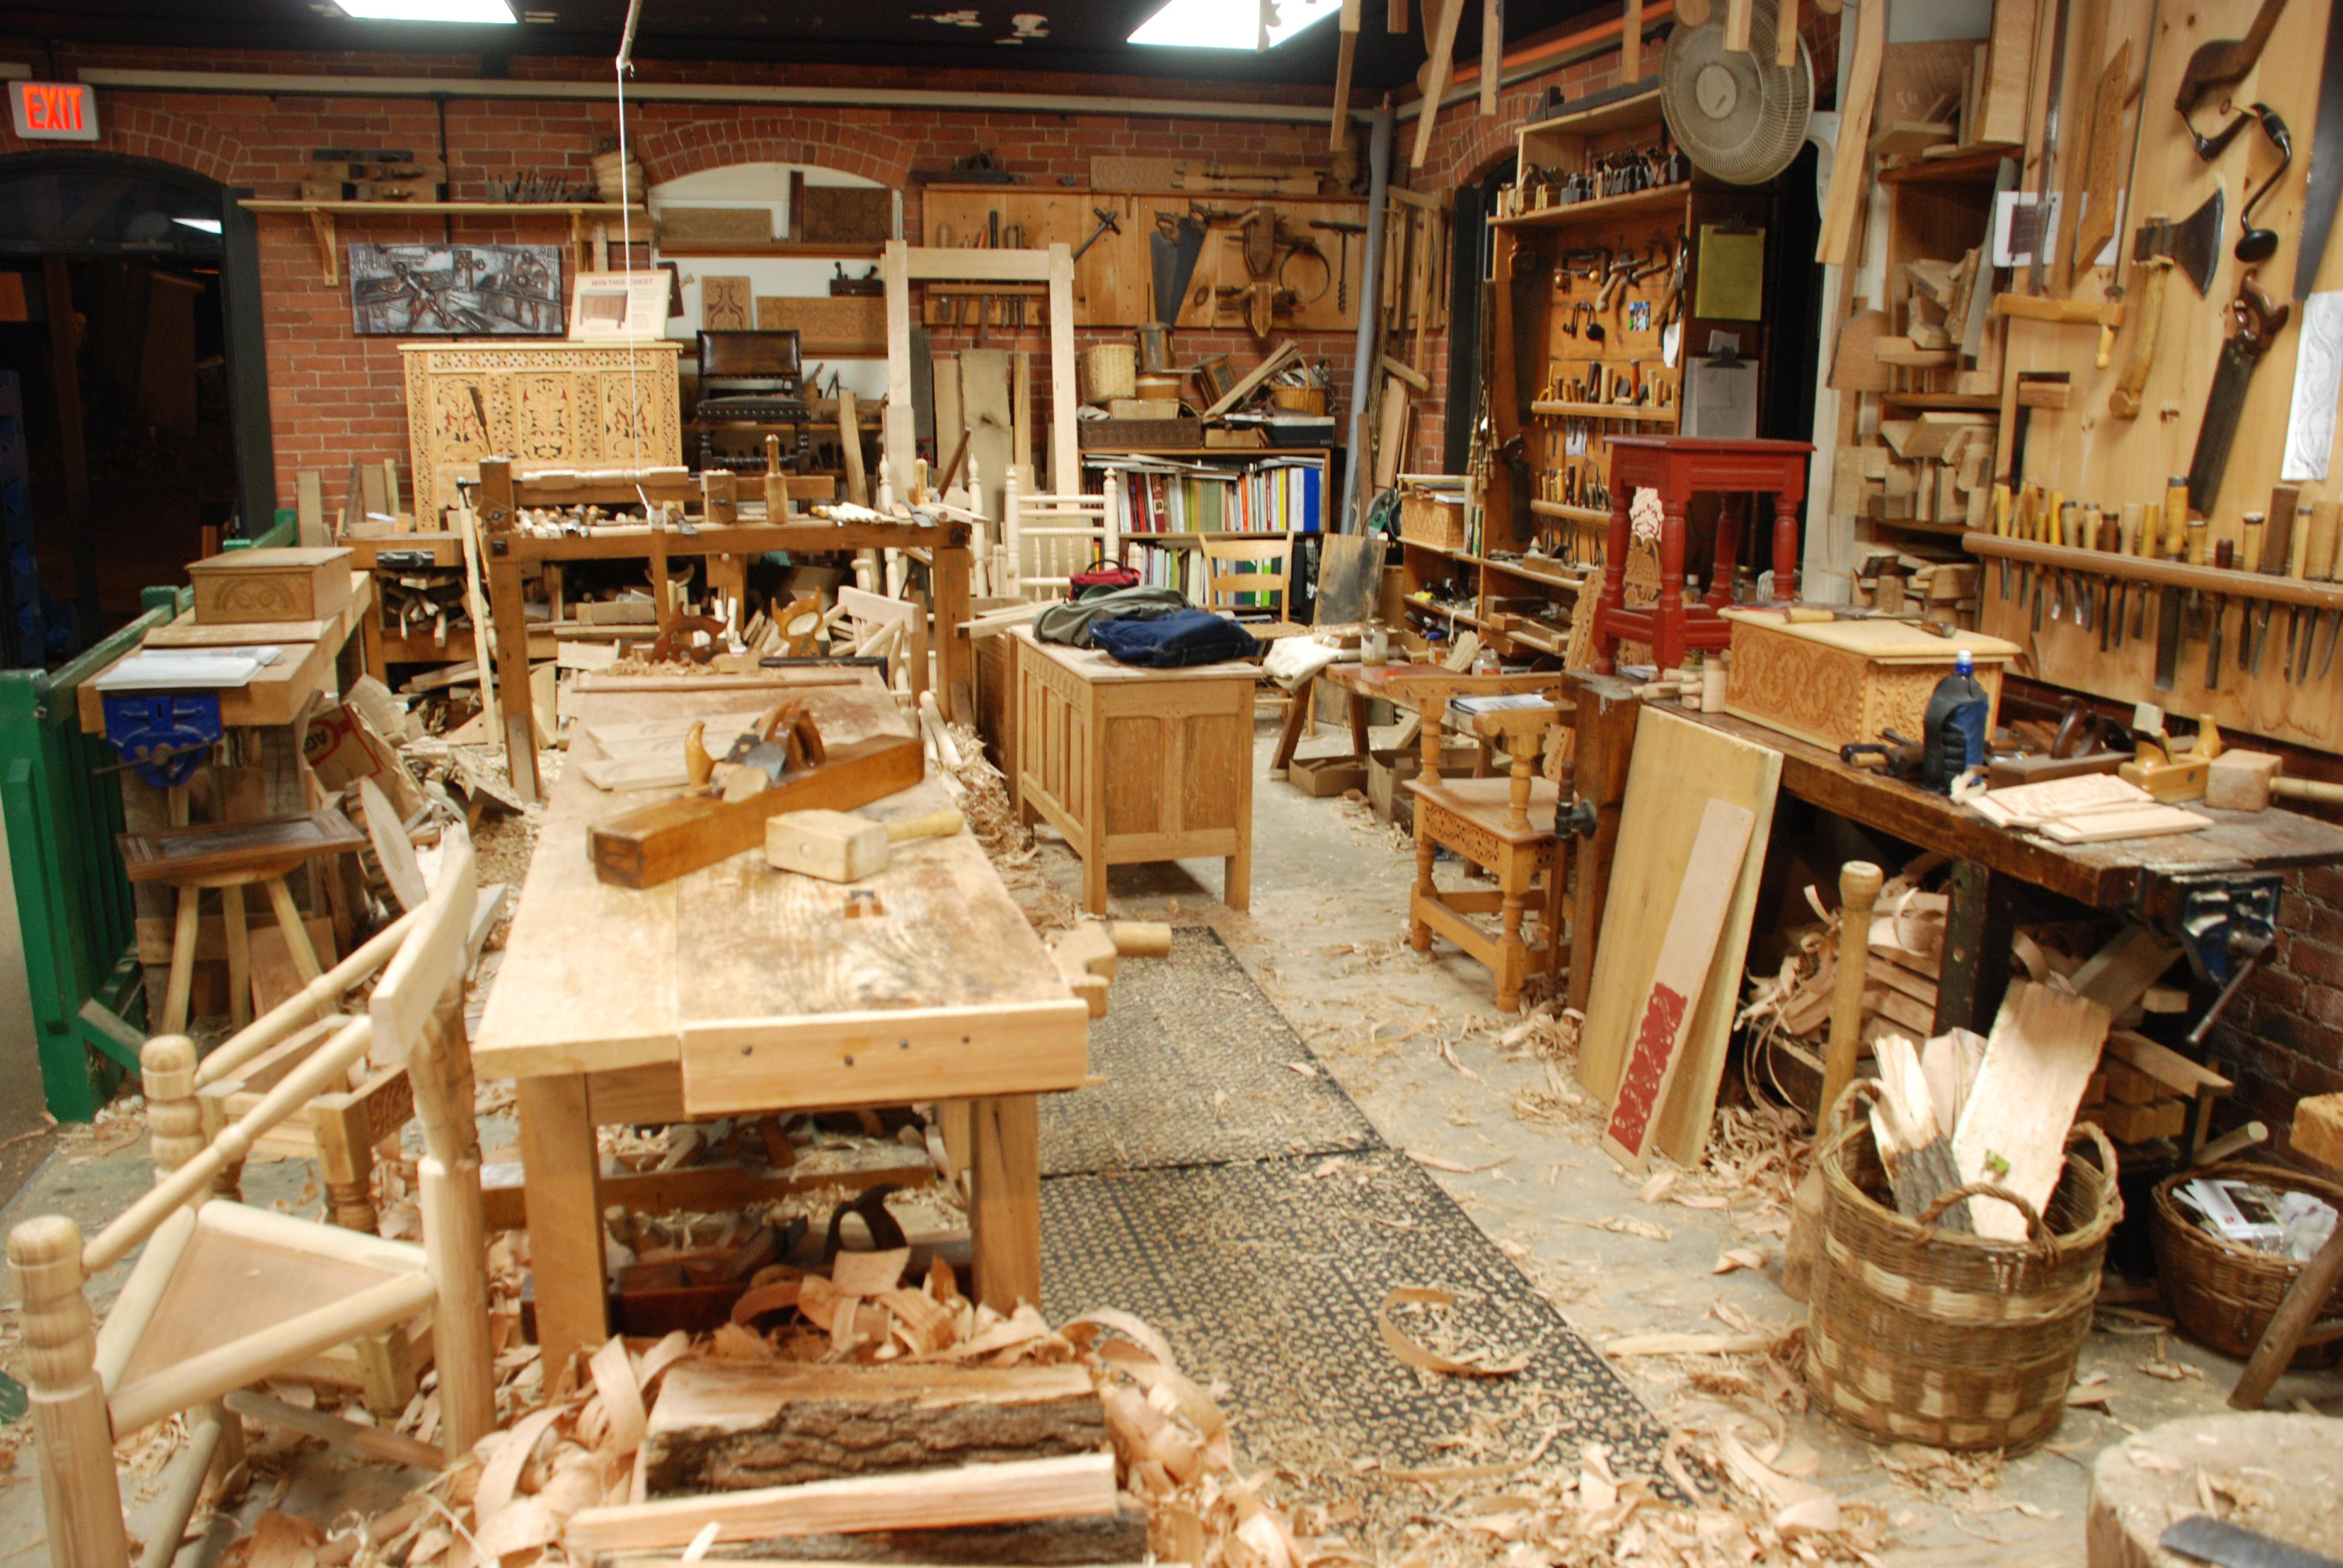 Get the Most from Woodworking Tools with Some Useful Tricks of the Trade